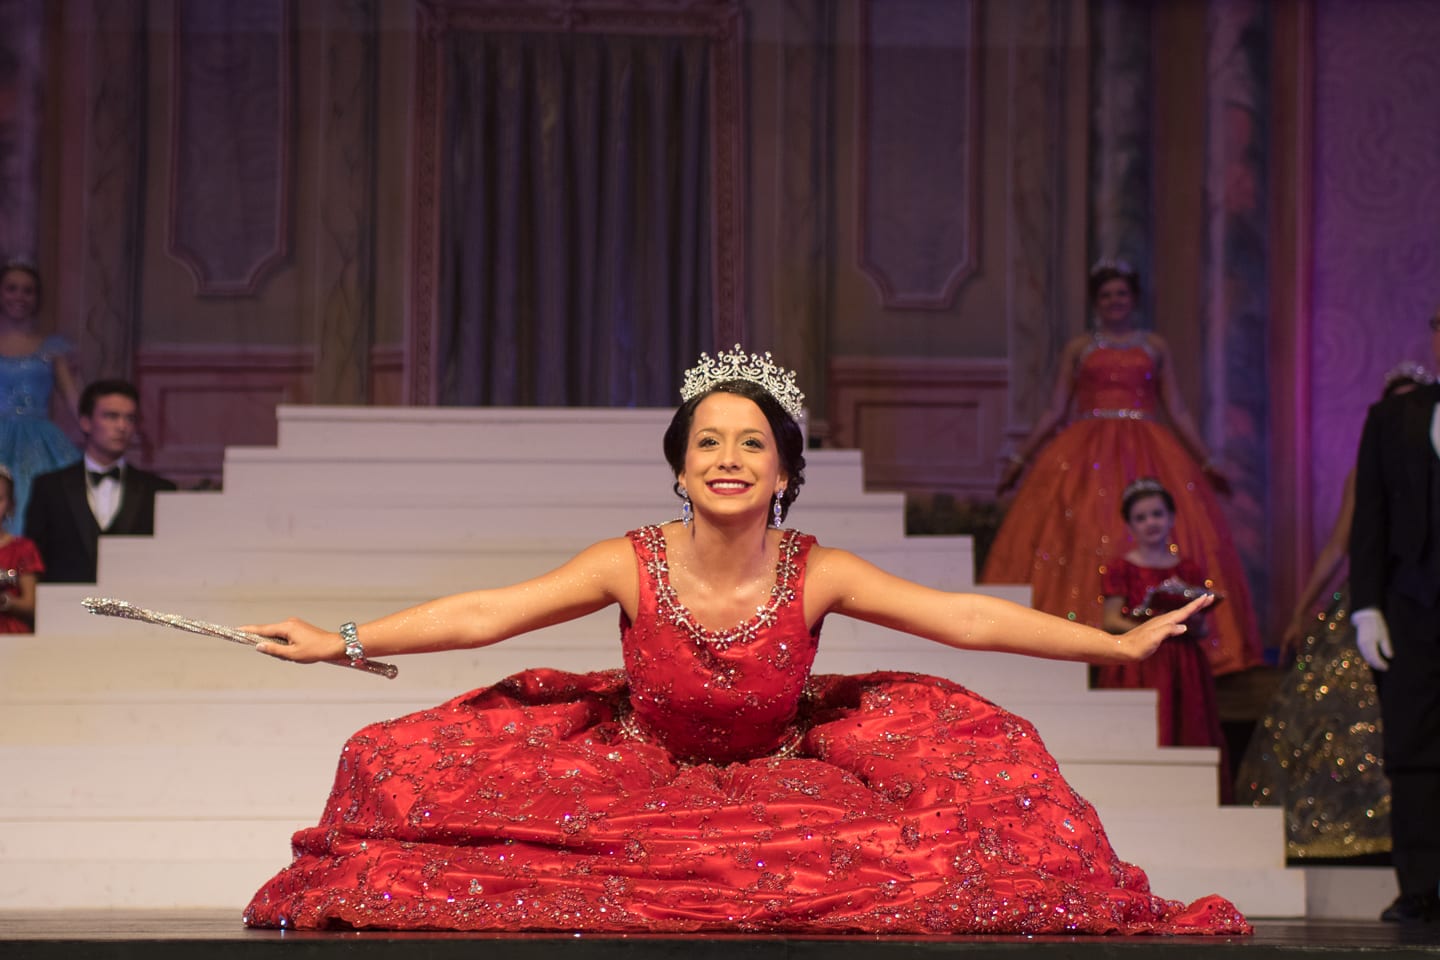 A woman in a red dress on stage with a tiara.